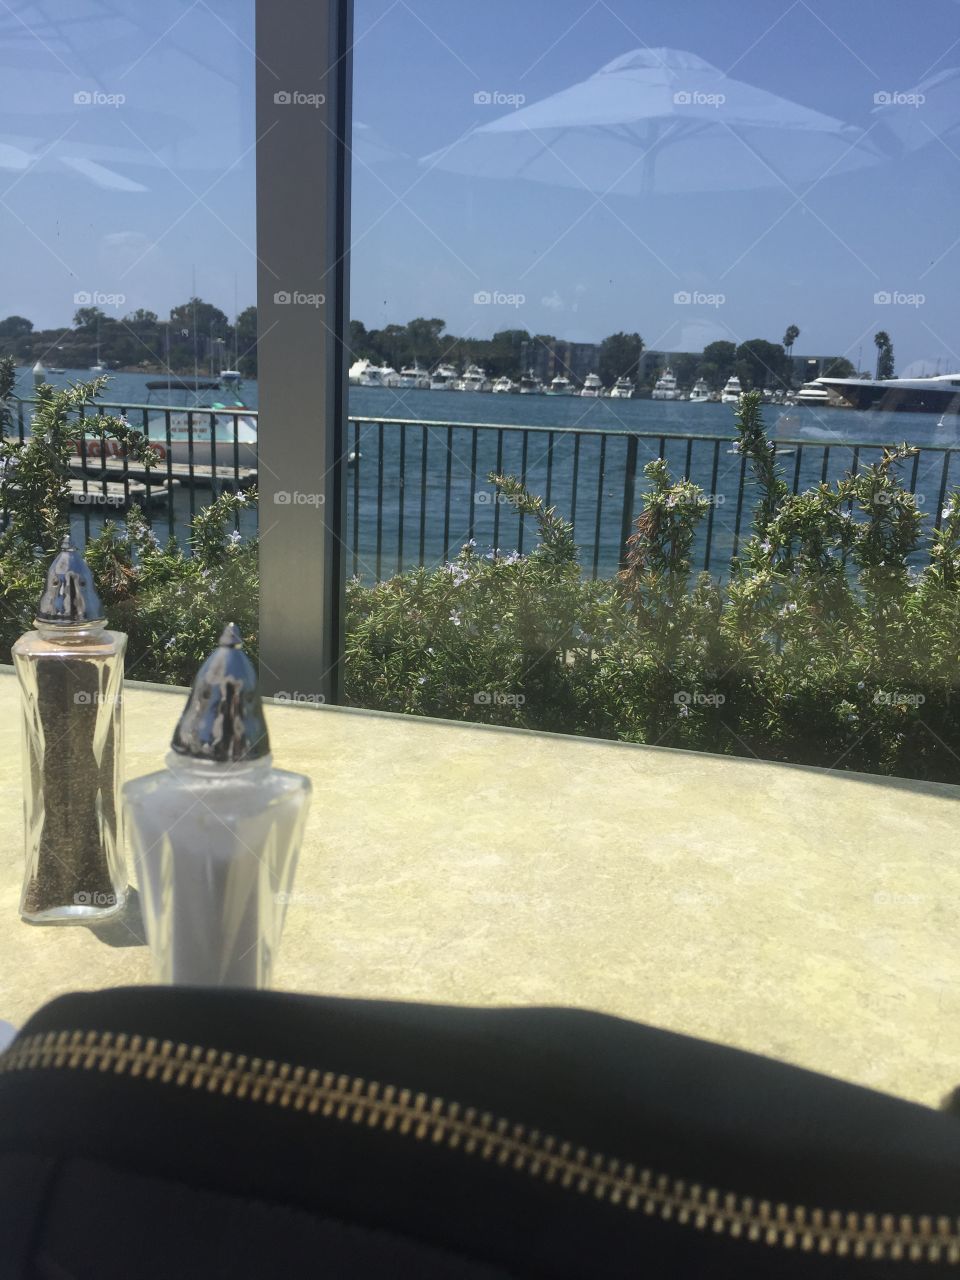 "Brunch Blues"- low perspective viewpoint from a brunch table in Marina Del Rey on a beautiful clear blue sky day